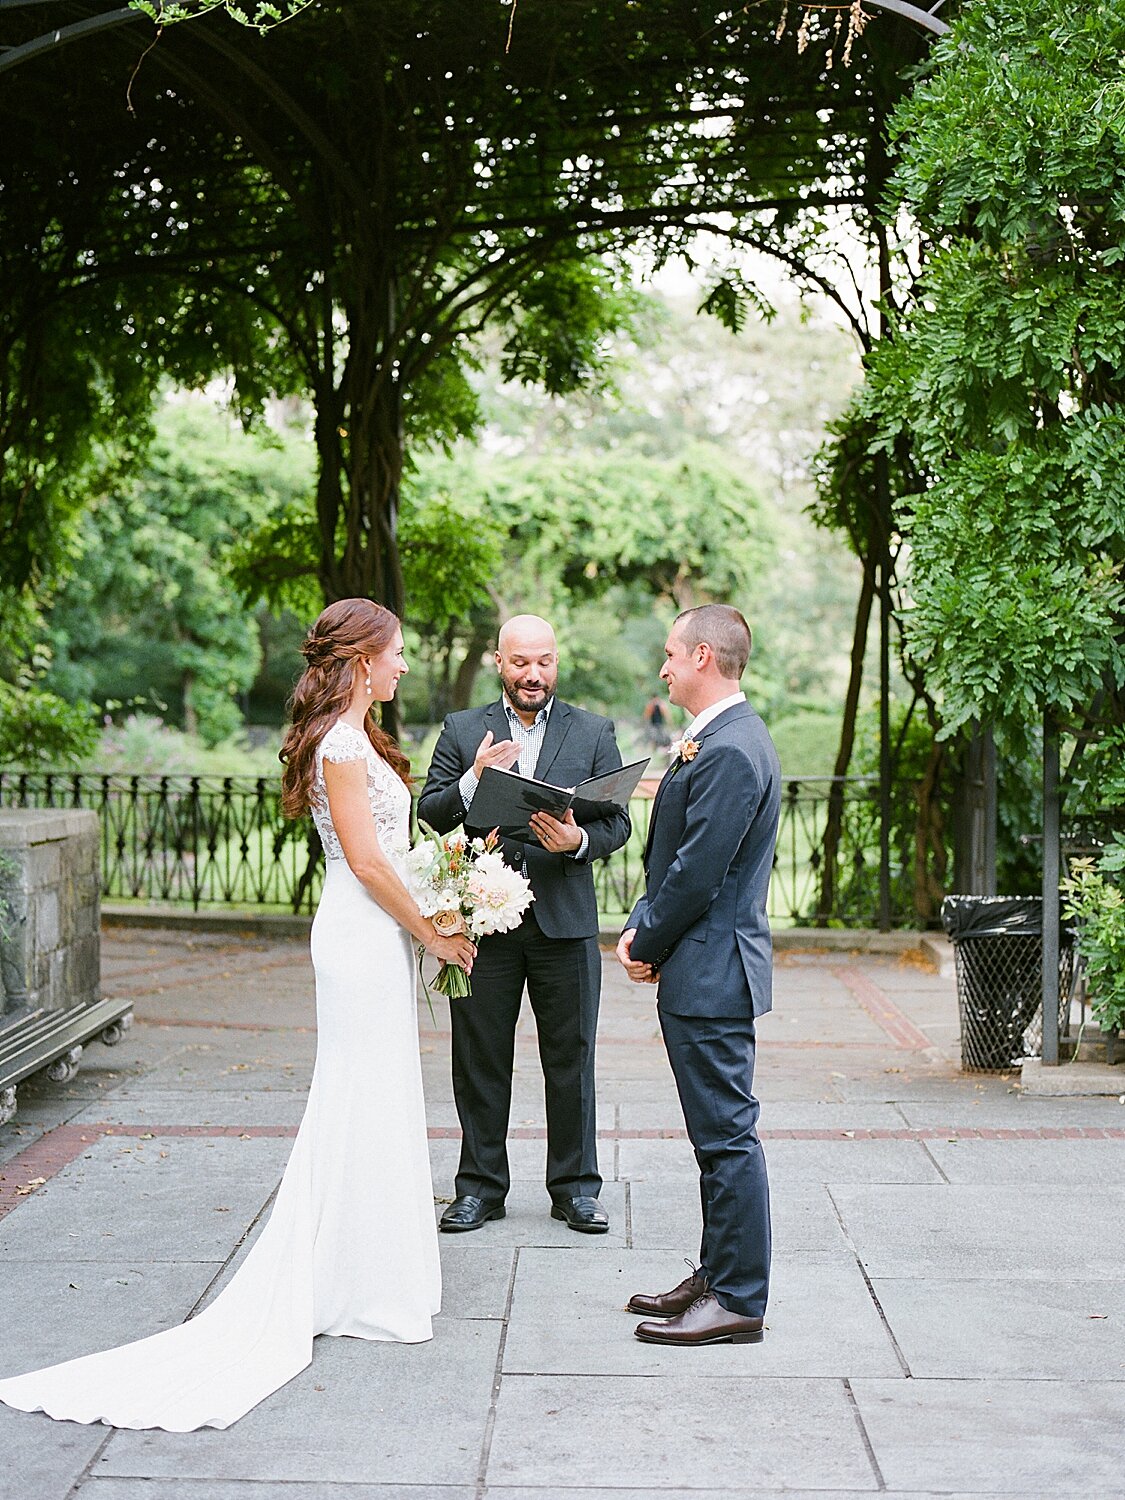 bride and groom exchange vows with officiant | Asher Gardner Photography | Elopement at the Central Park Conservatory Gardens